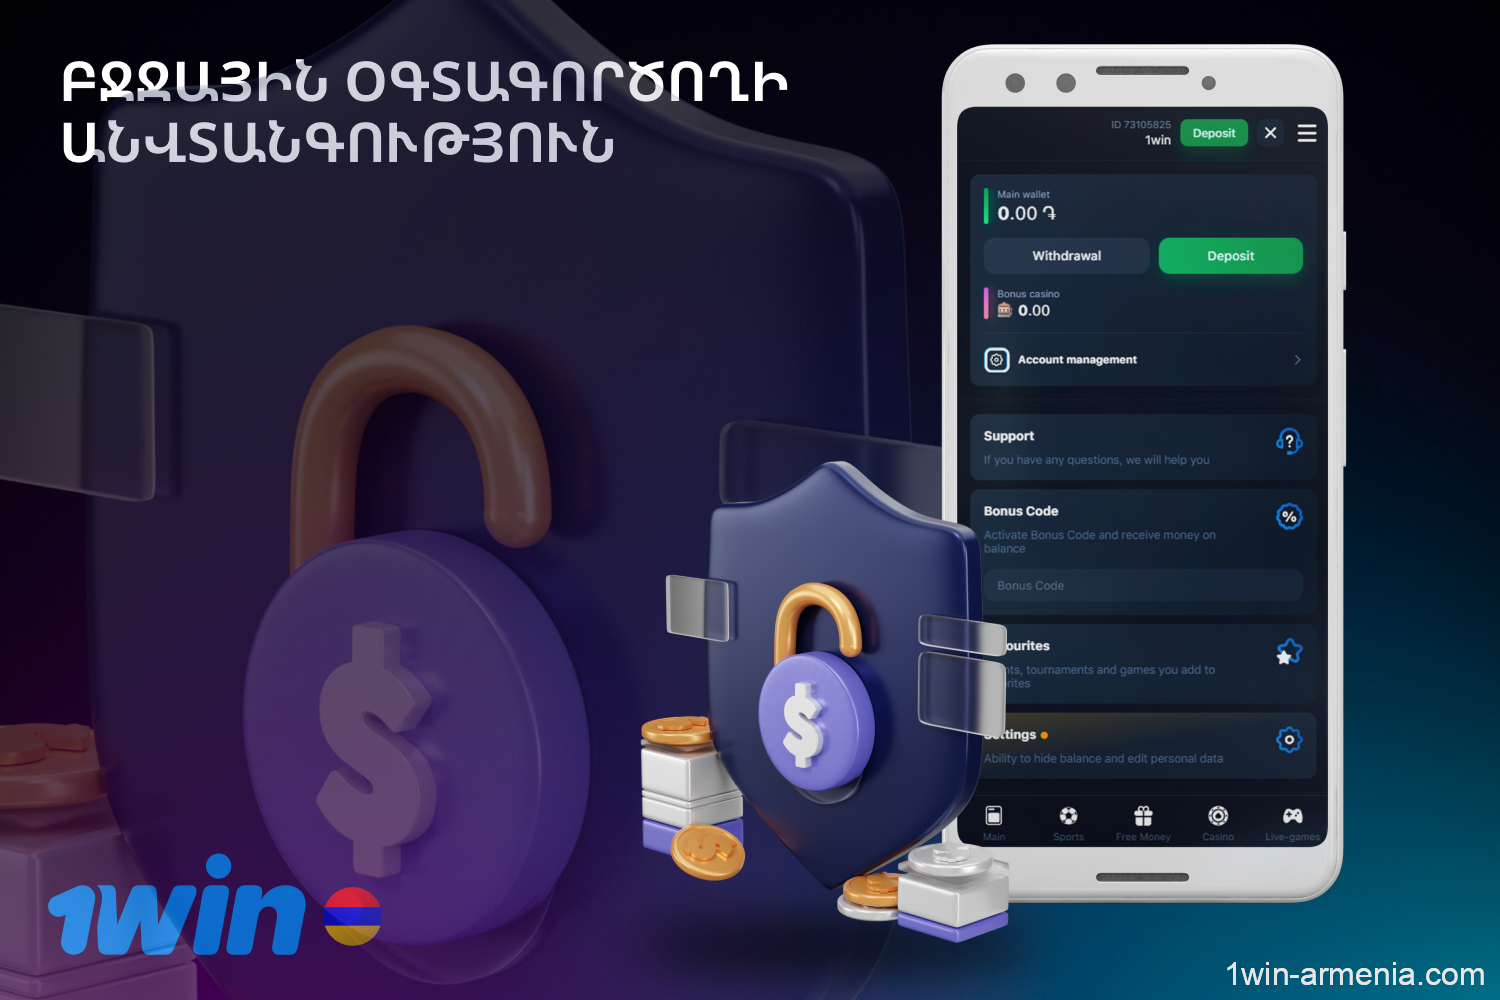 1win application is safe and guarantees privacy of personal data of players from Armenia